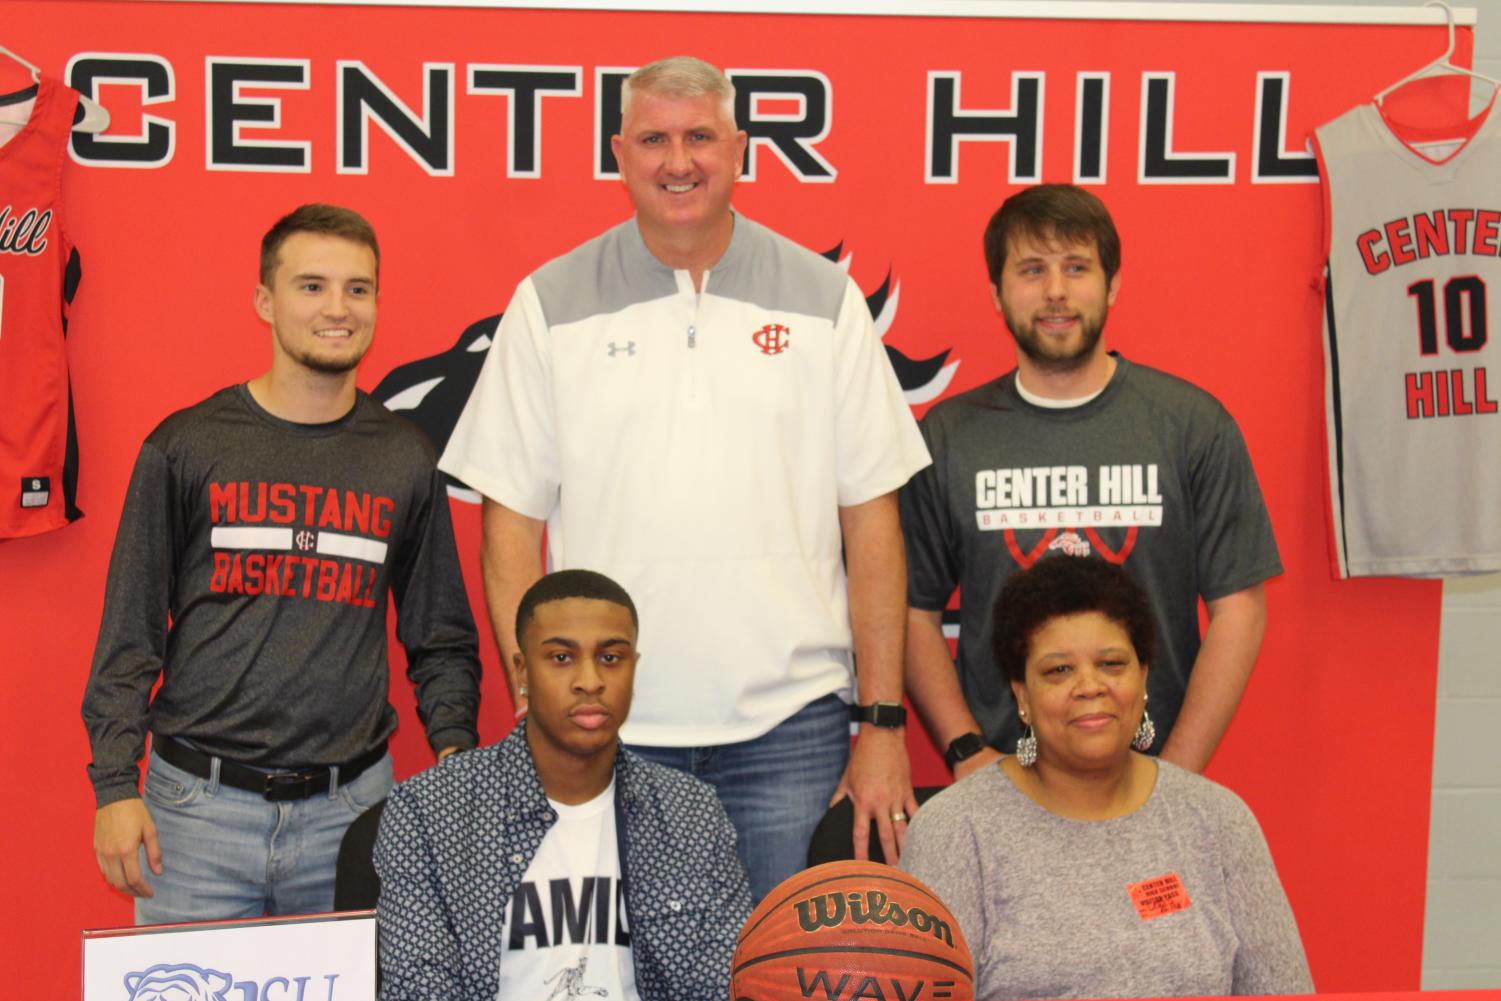 Ken+Lewis+signs+to+play+D1+basketball+at+Jackson+State+University